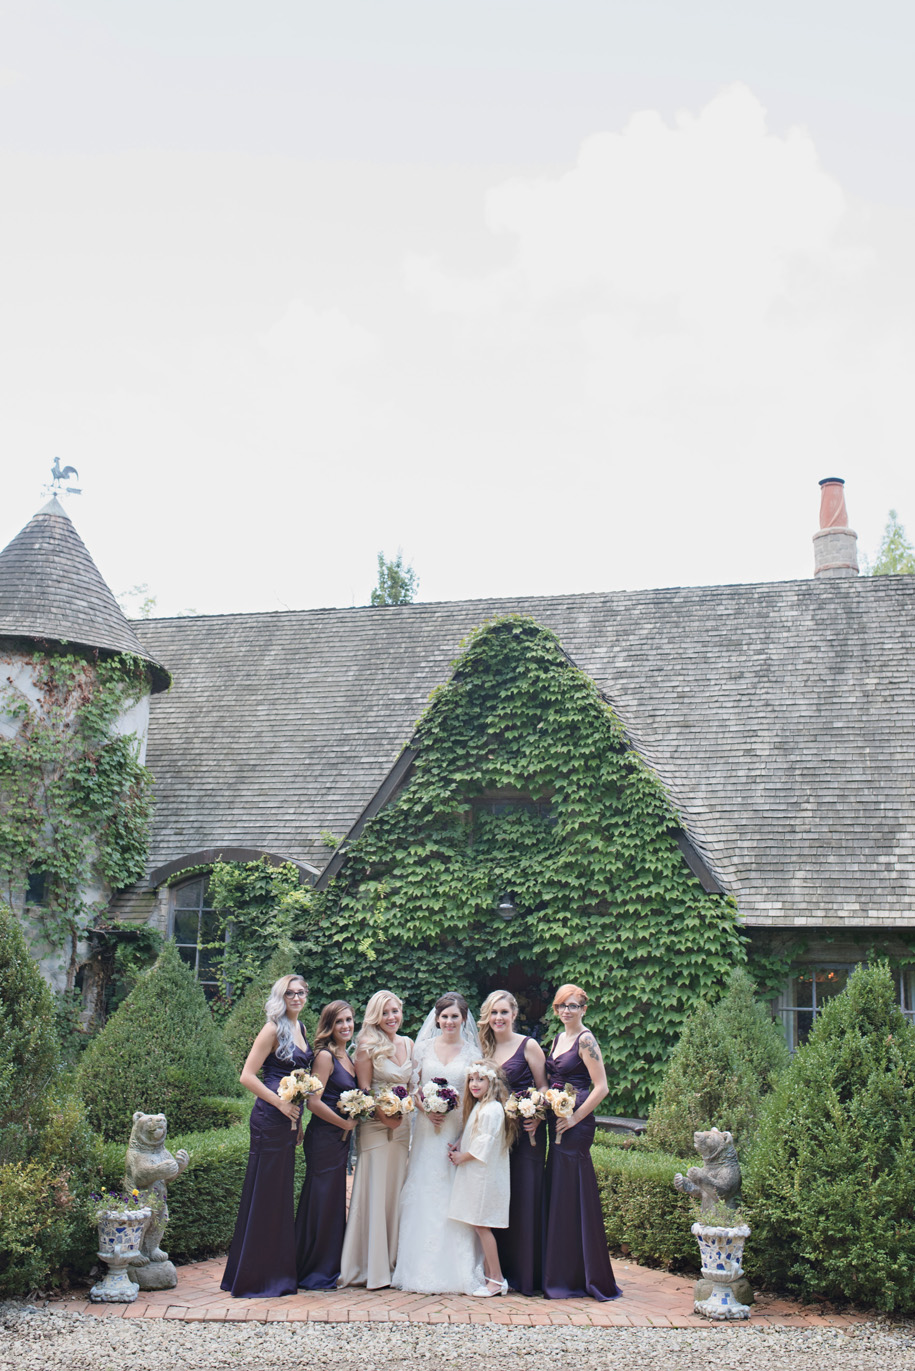 Bridemaids in Purple l Purple, Cream and Grey Wedding l Rustic and Romantic Outdoor Inner Circle Estate Wedding in the woods by Kari Dawson